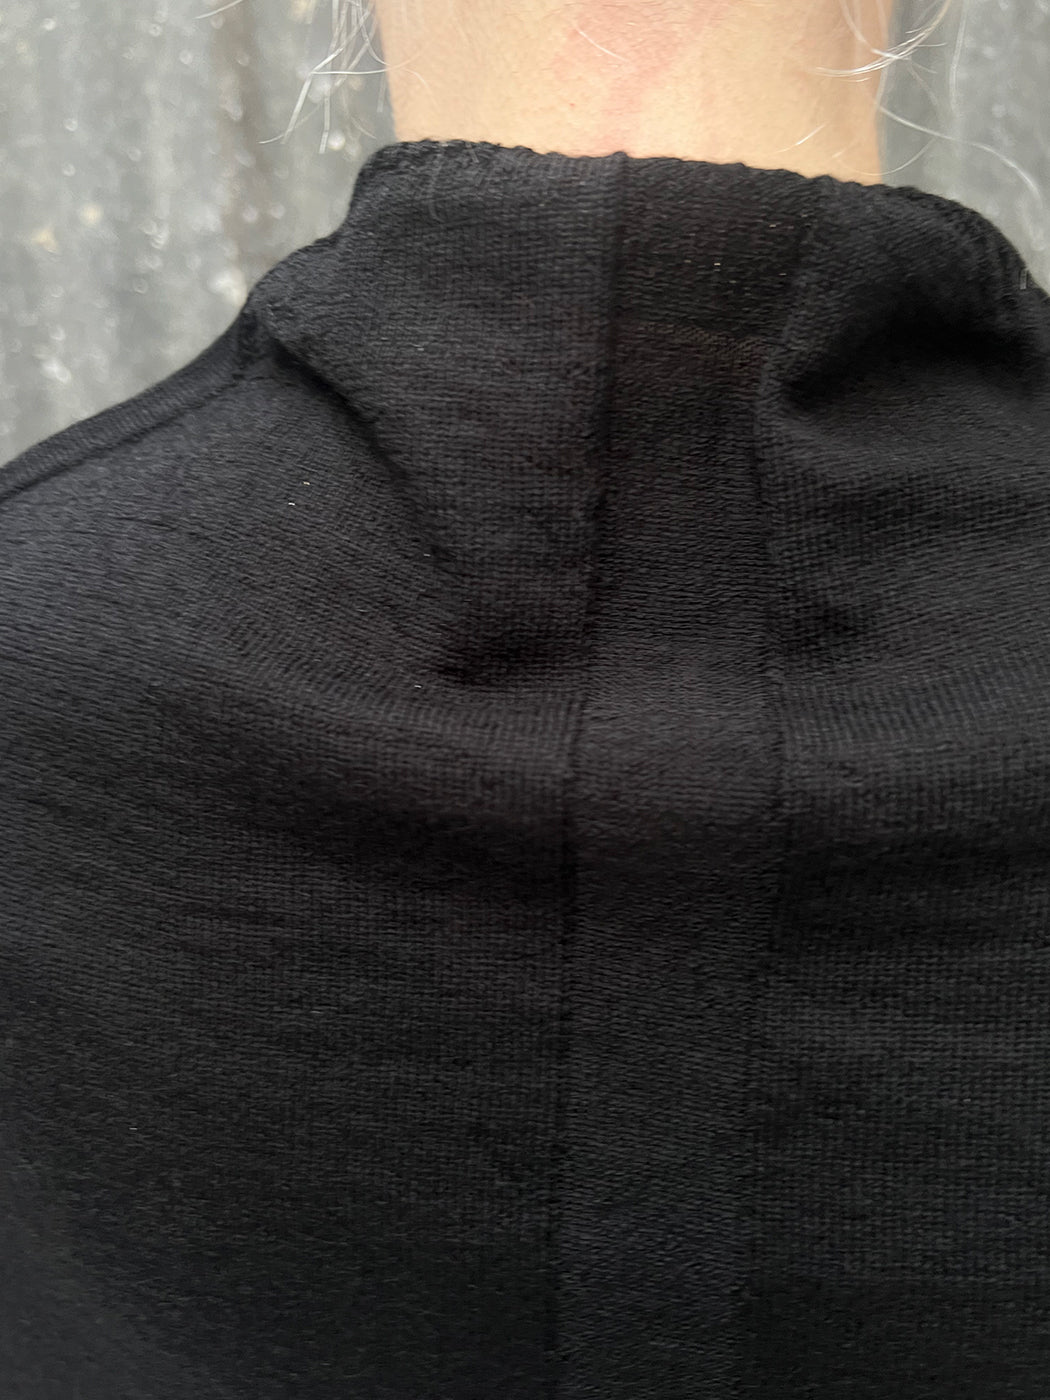 Rick Owens Crater knit sweater